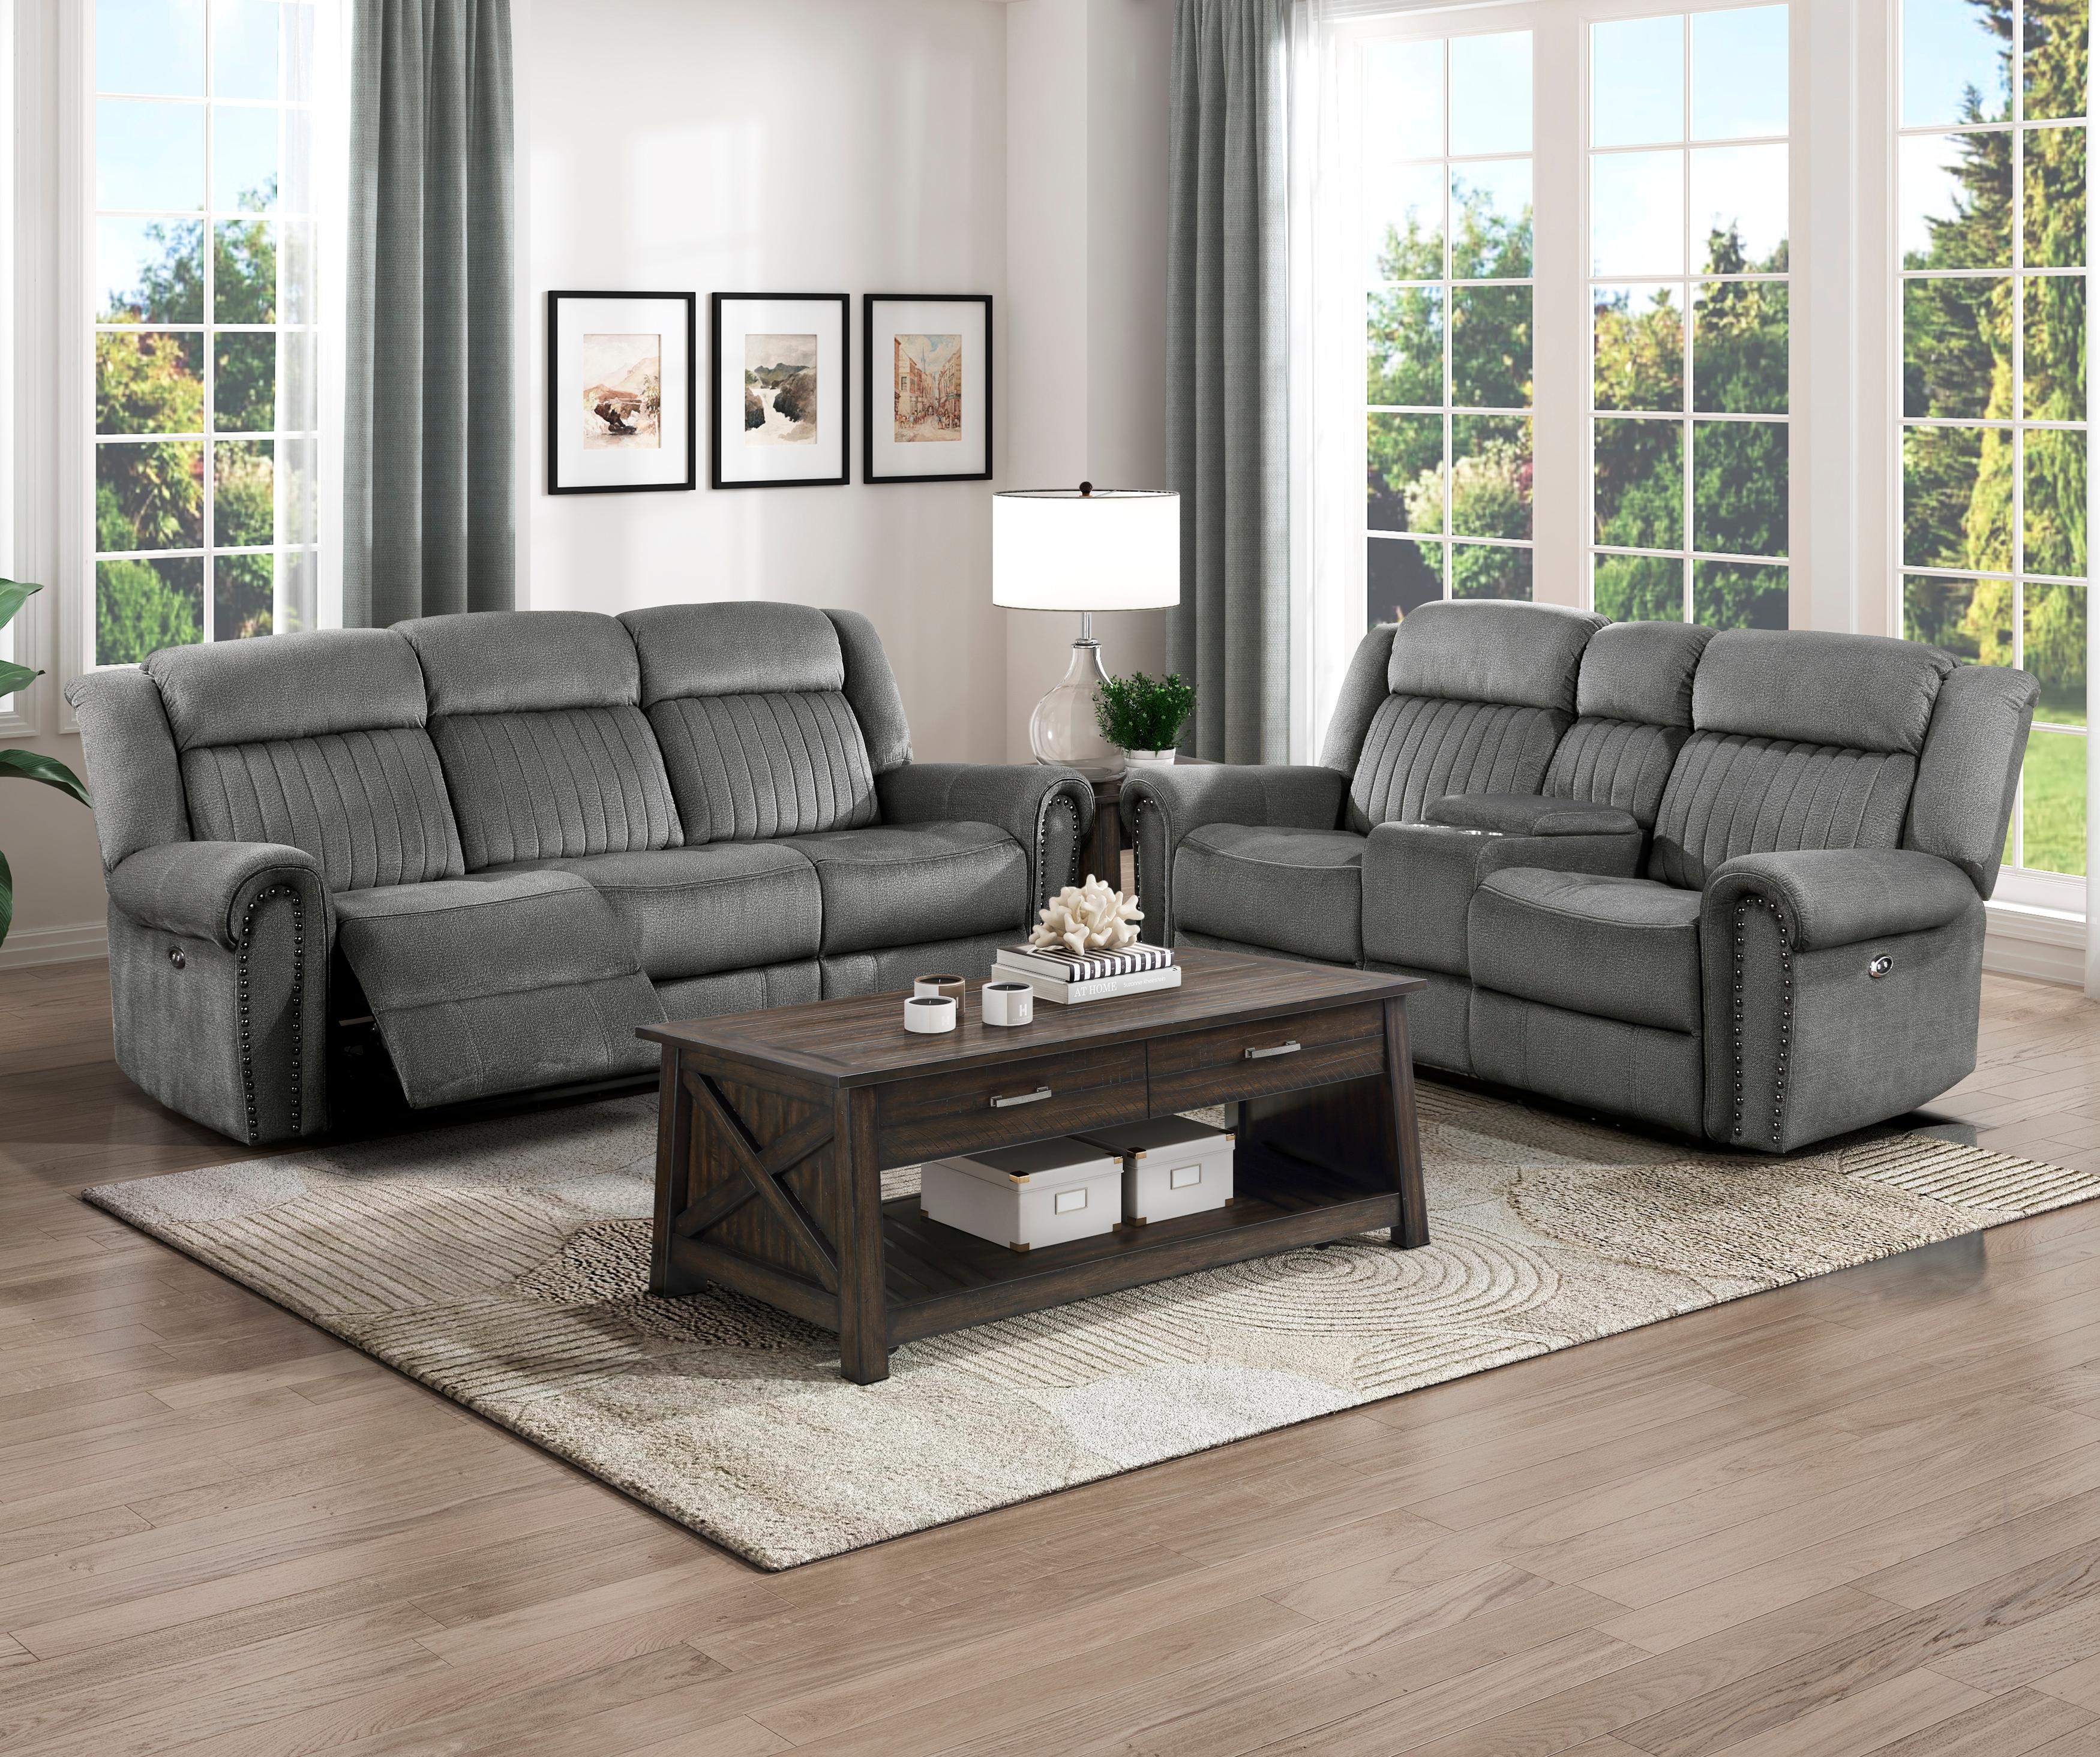 Transitional Power Reclining Set 9204CC-PW-2PC Brennen 9204CC-PW-2PC in Charcoal Microfiber